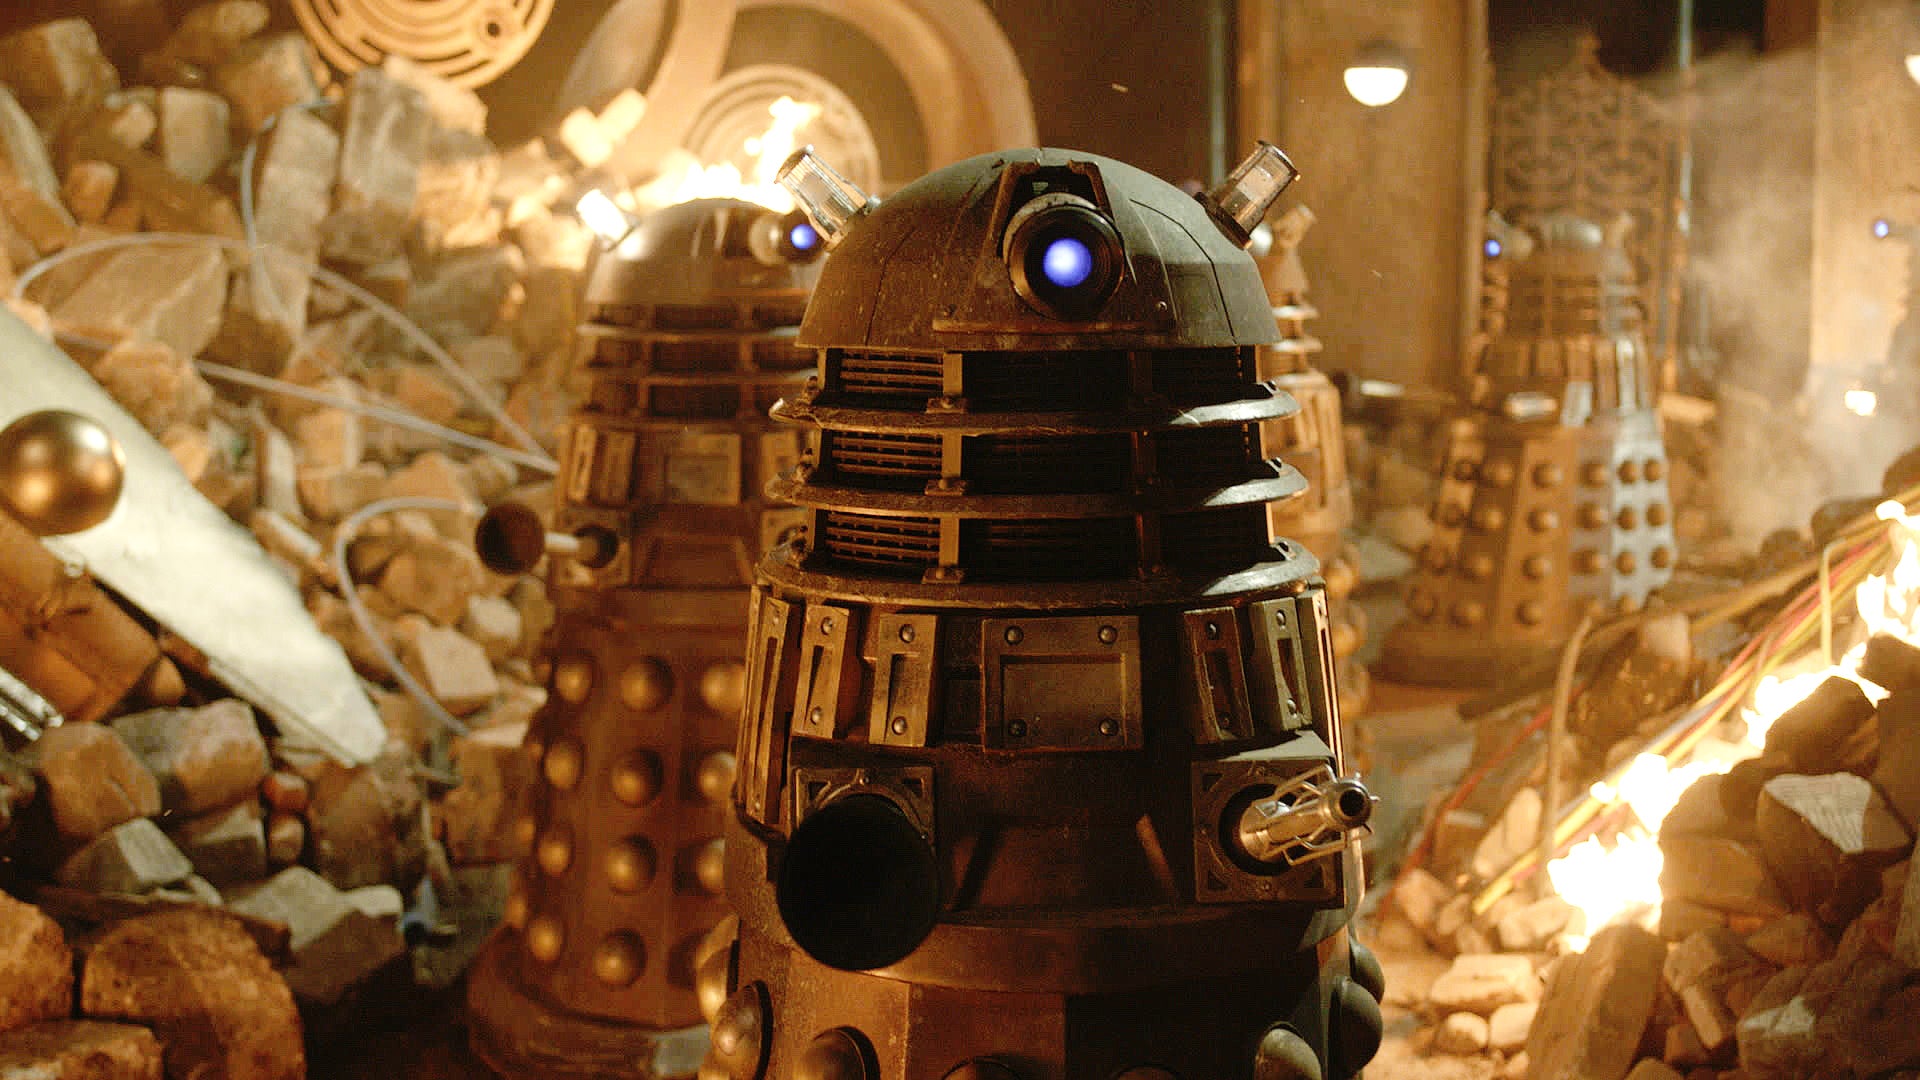 I'll be back: The Exterminators (aka The Daleks) make a return for the BBC's 50th anniversary Doctor Who special